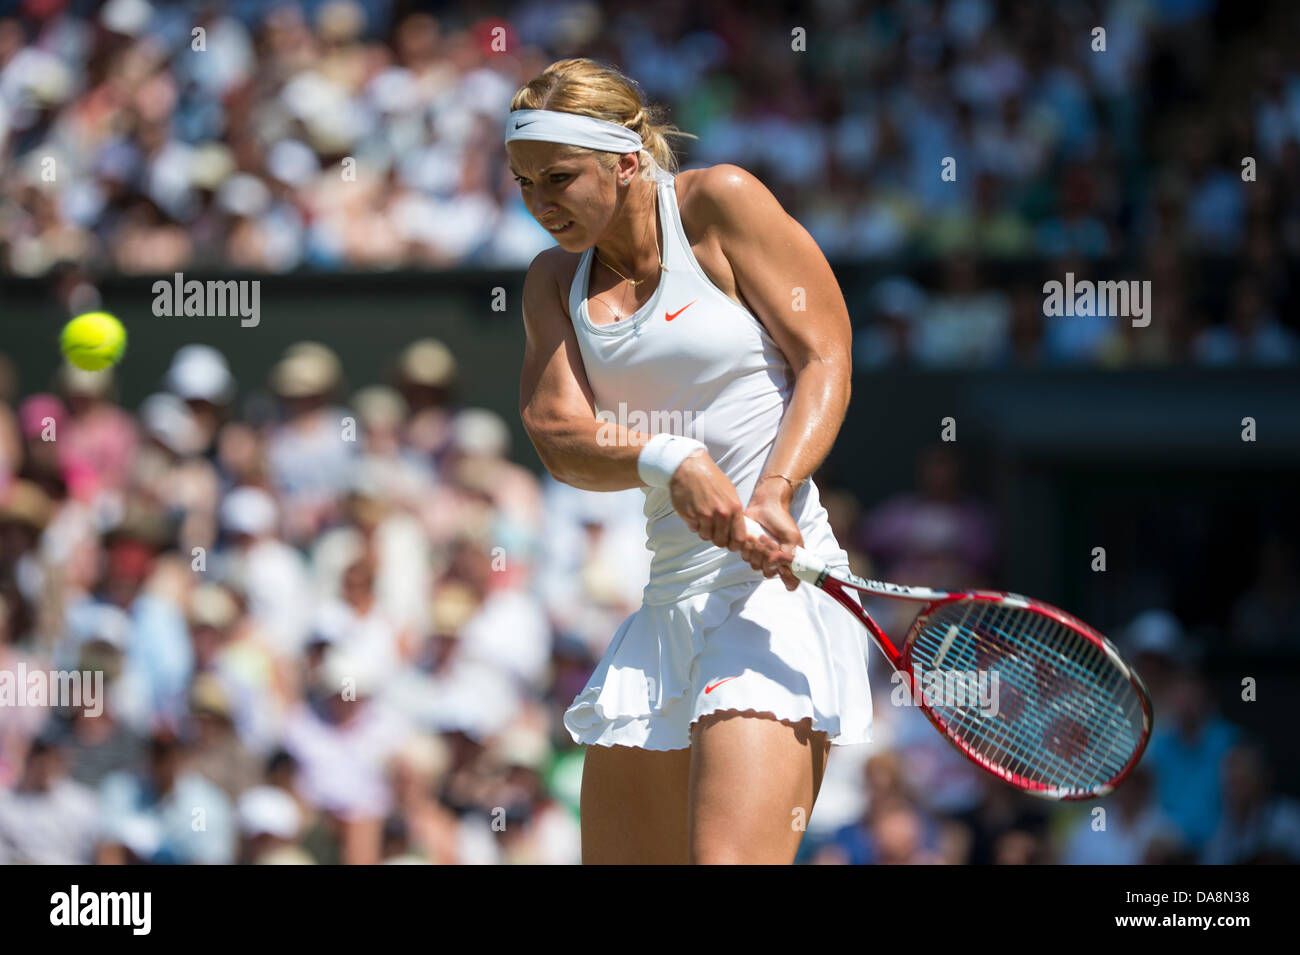 Tennis: Wimbledon Championship 2013, Sabine Lisicki of Germany in action during the Ladies' Singles final match against Marion Bartoli of France on day twelve of the Wimbledon Lawn Tennis Championships at the All England Lawn Tennis and Croquet Club on July 6, 2013 in London, England. Credit:  dpa picture alliance/Alamy Live News Stock Photo